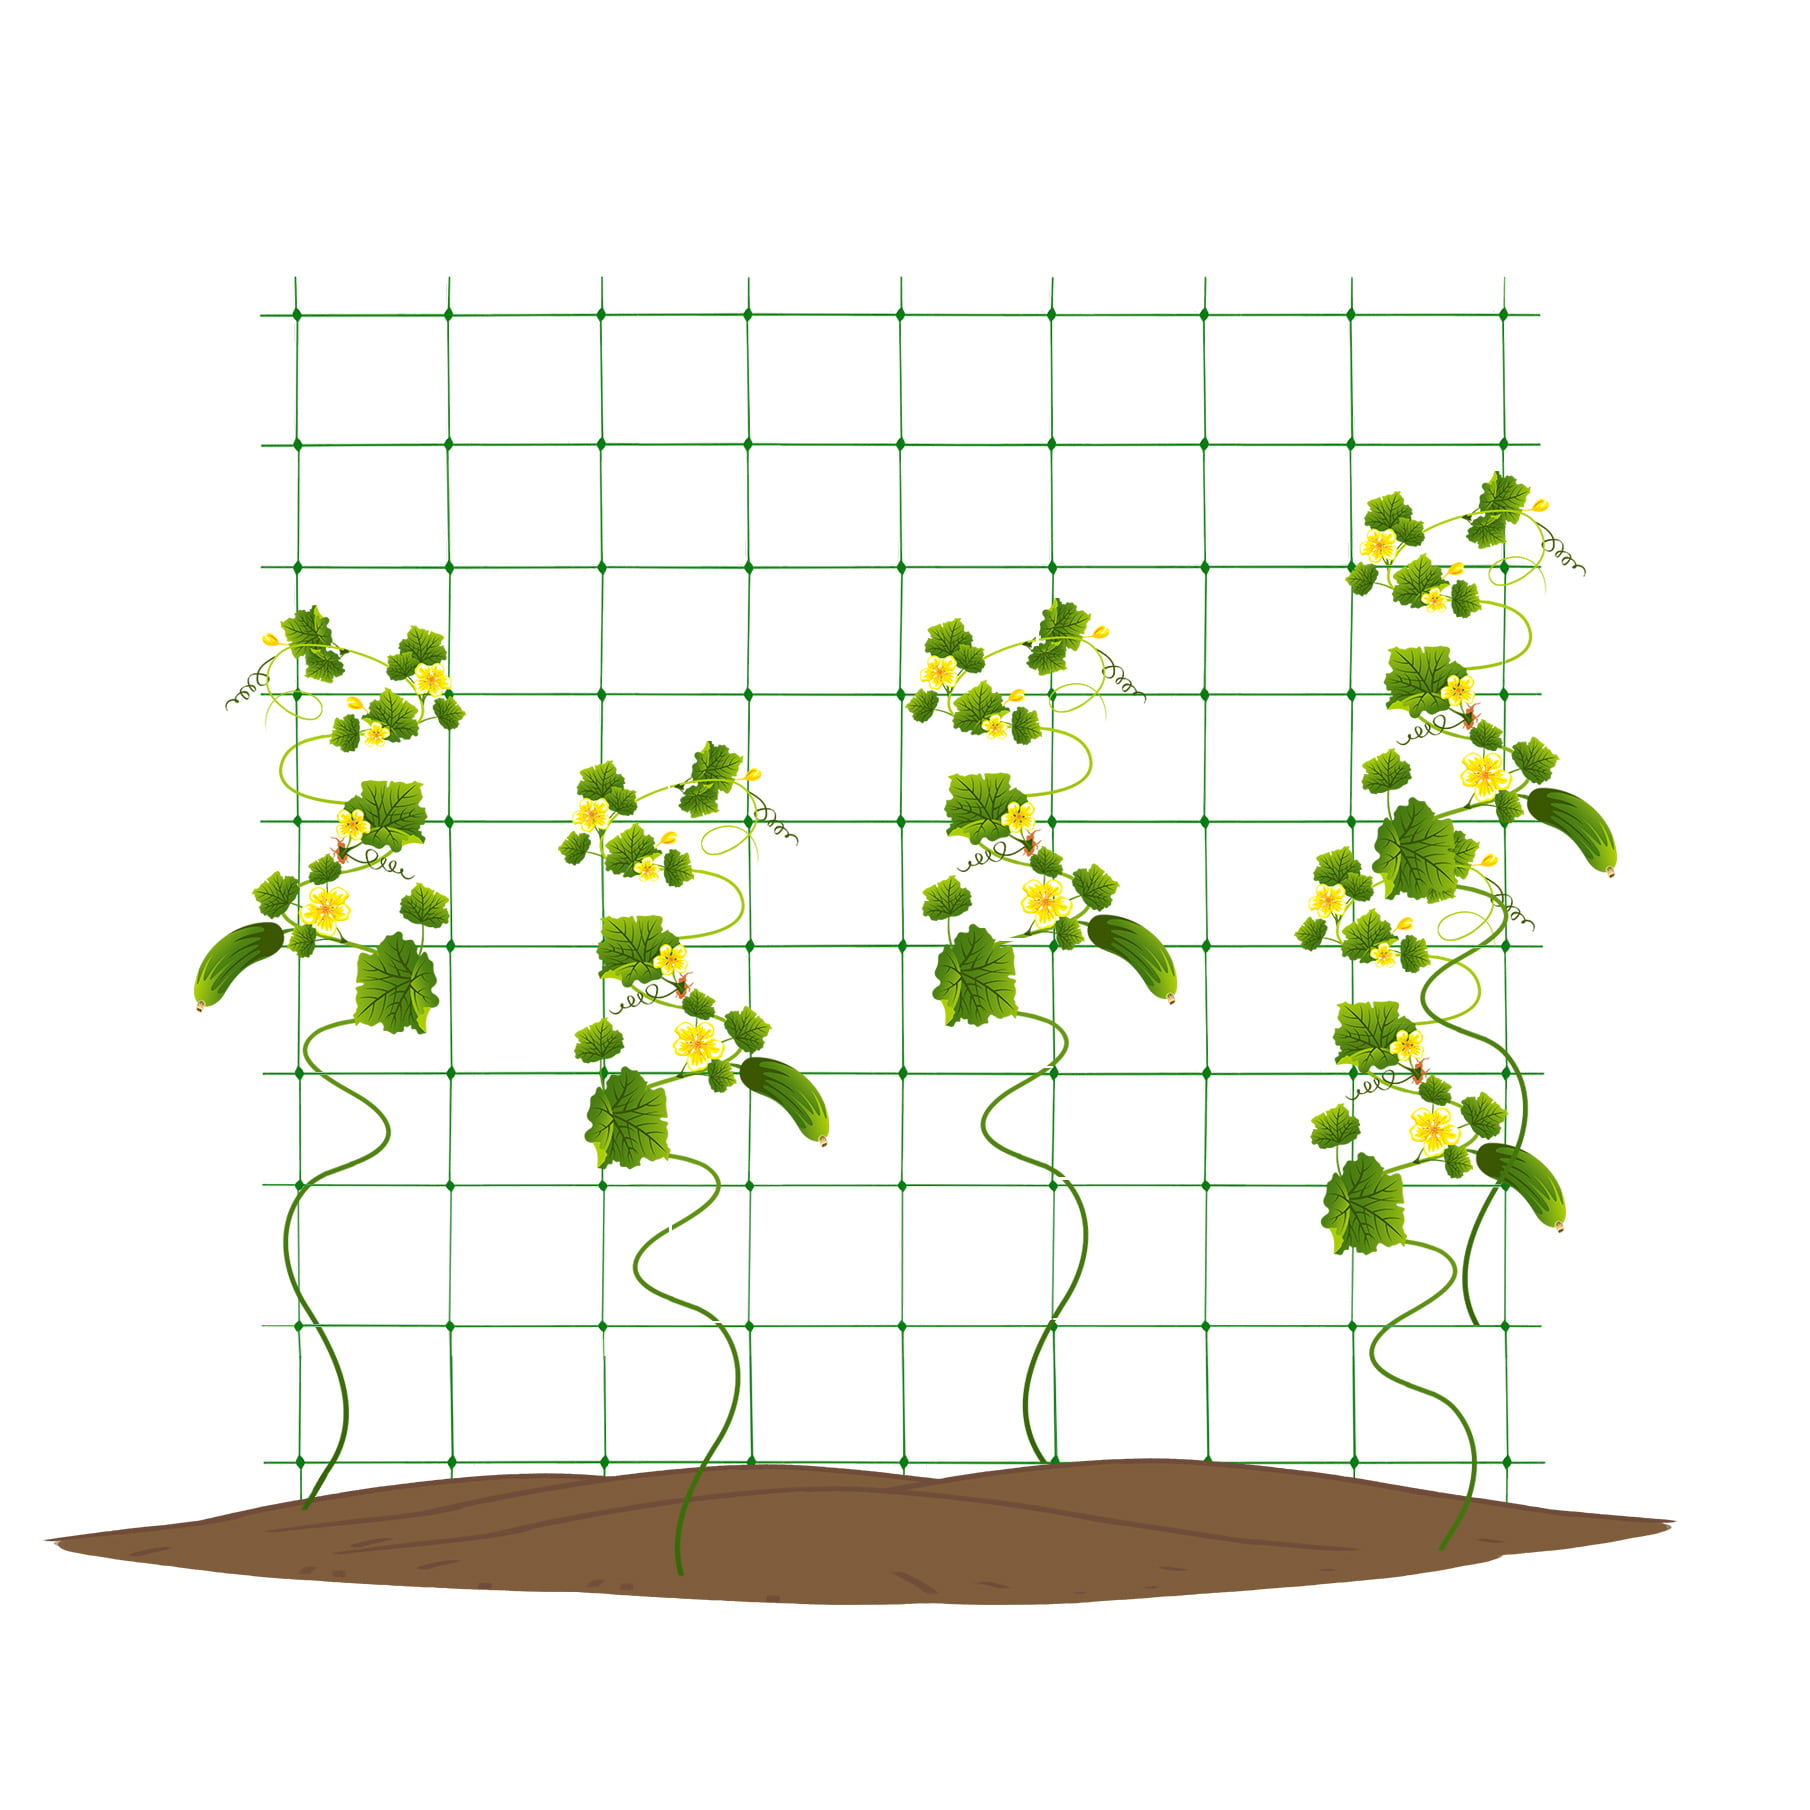 Details about   NEW Green Durable Long Plastic Trellis Netting for Climbing Plants USA 